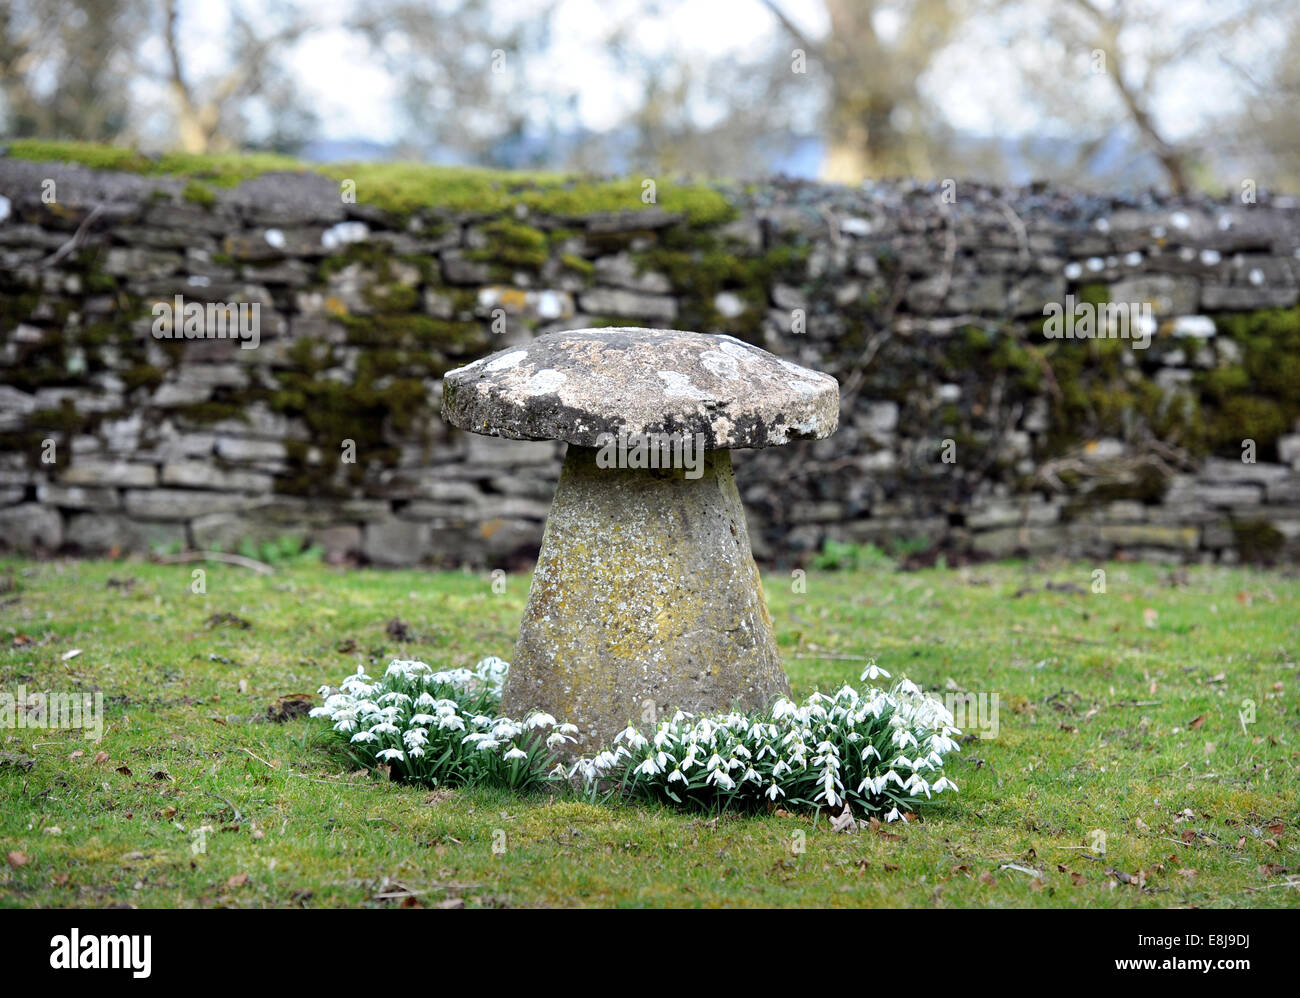 Snowdrops (Galanthus nivalis) surrounding a staddle stone in a Cotswold garden, Gloucestershire UK Stock Photo